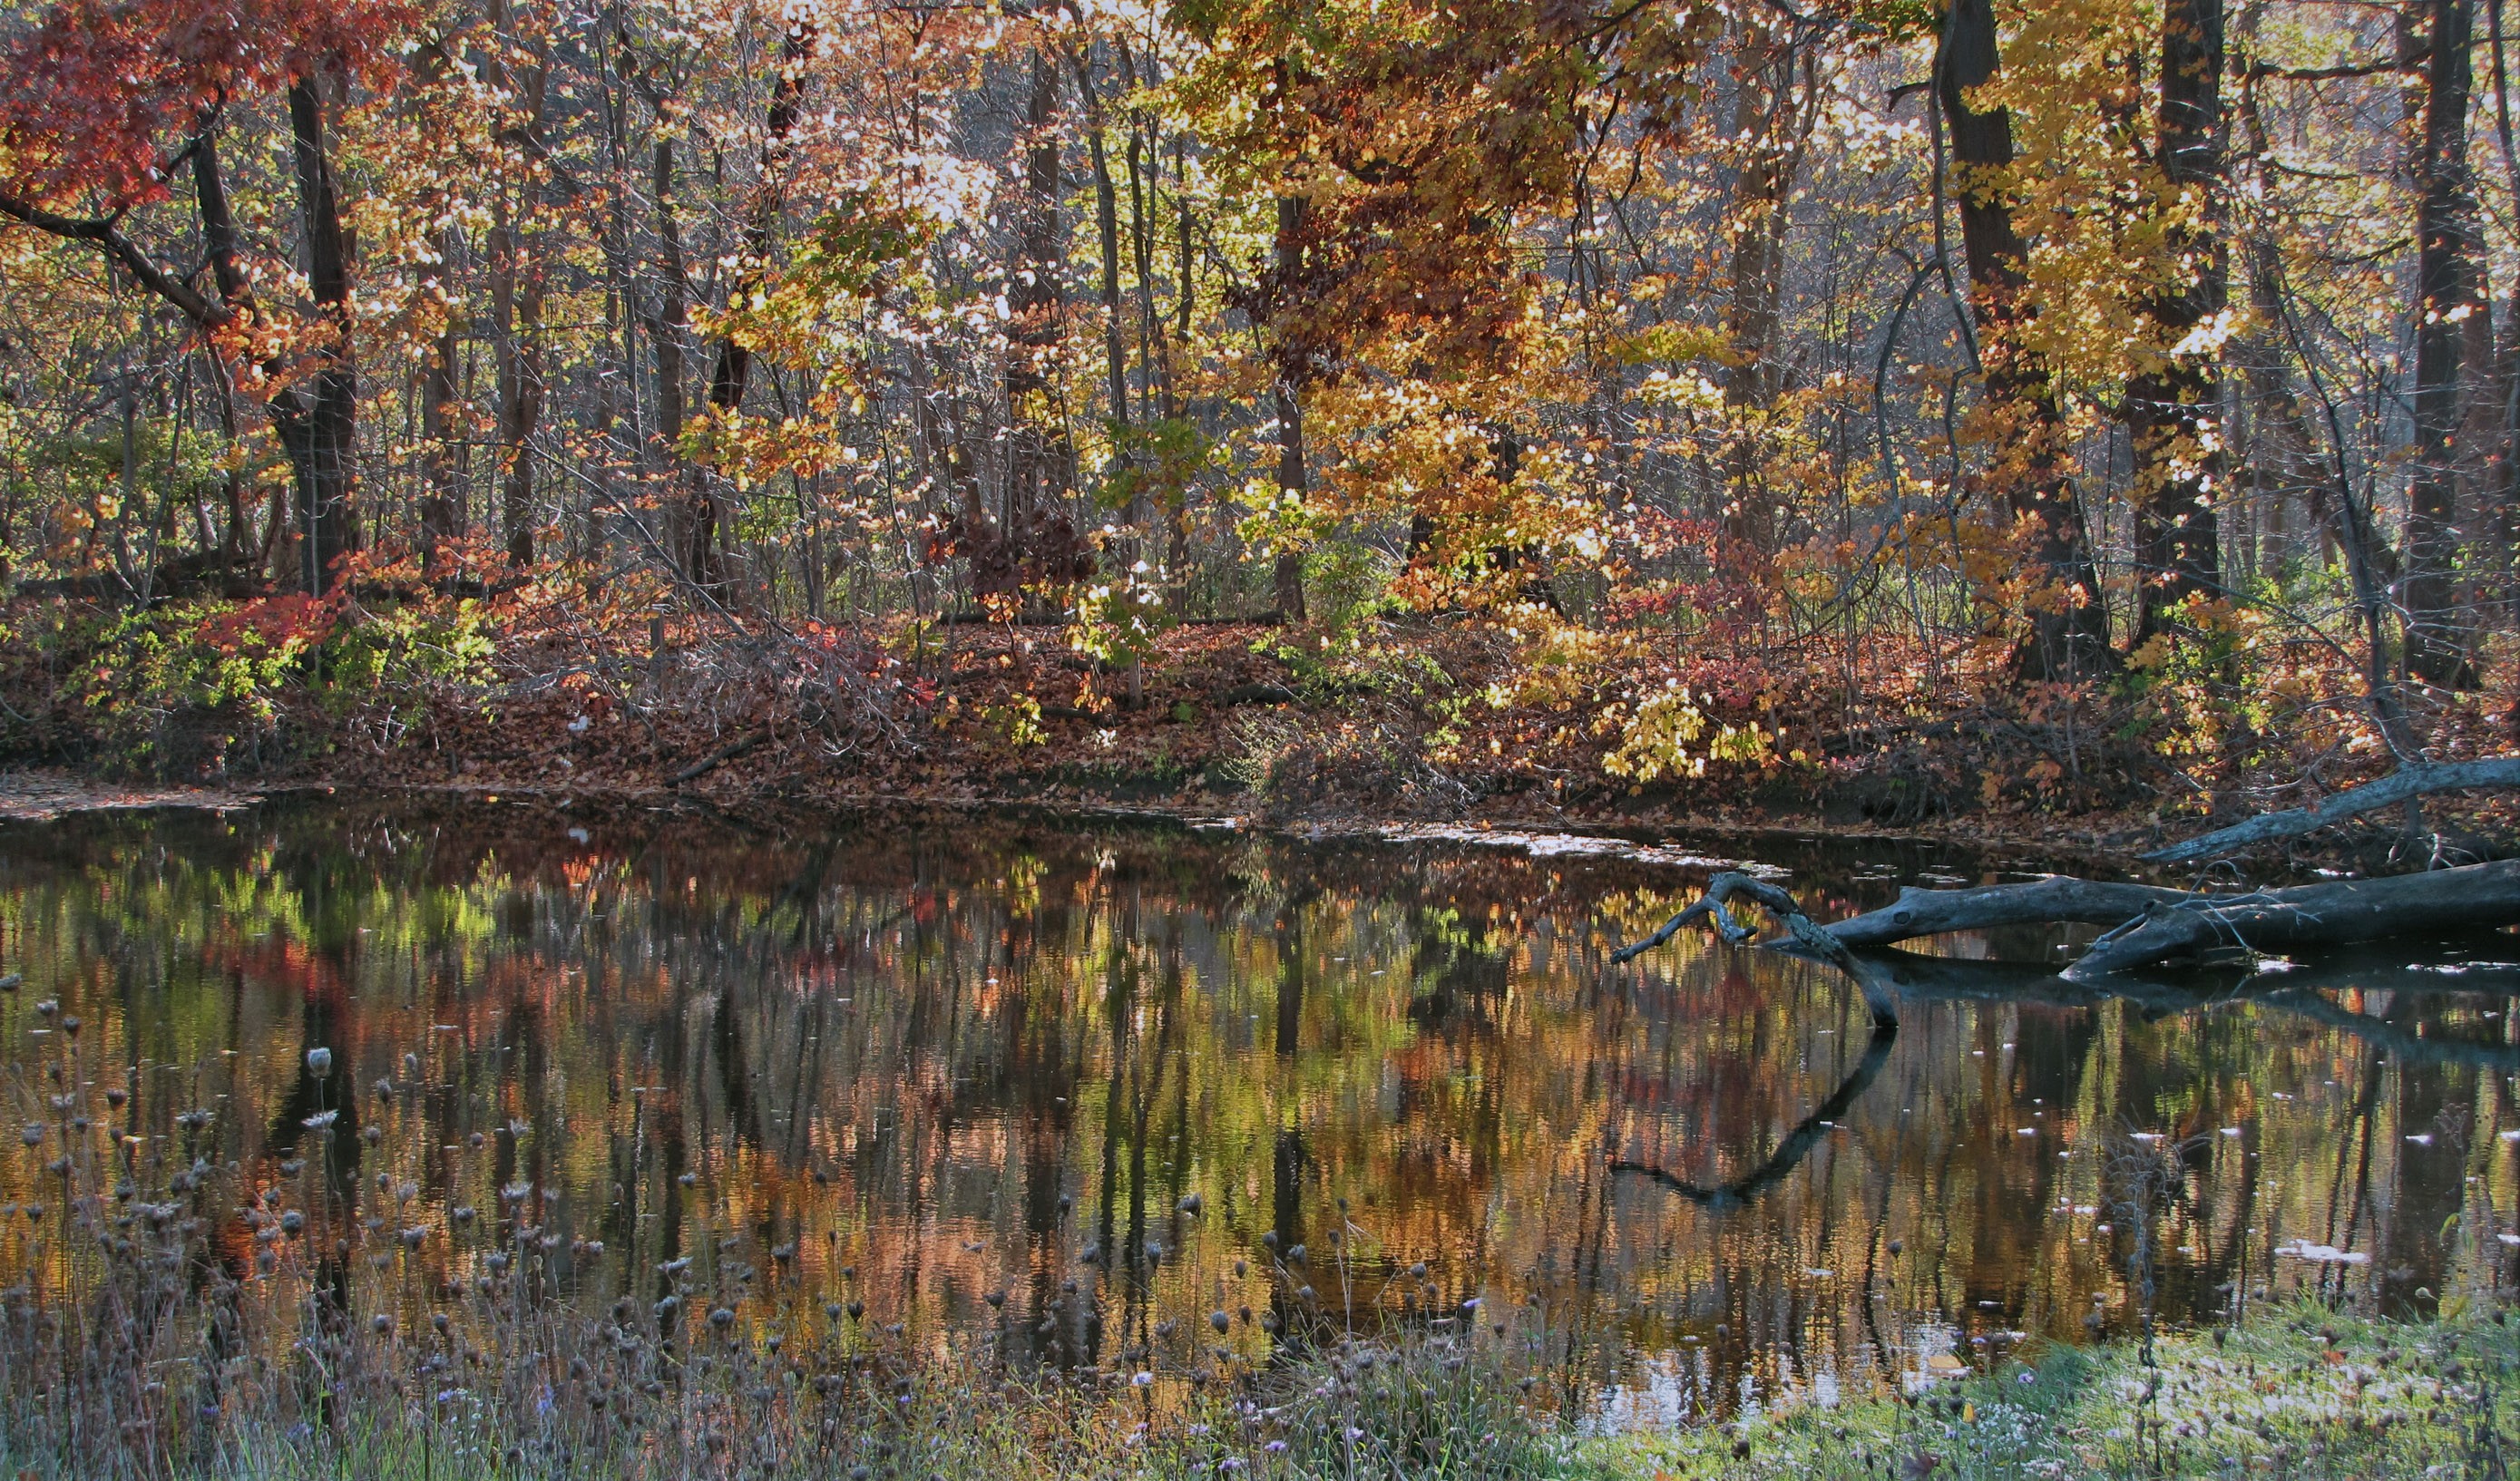 Reflection of fall color in pond found in Cleveland Metro Park